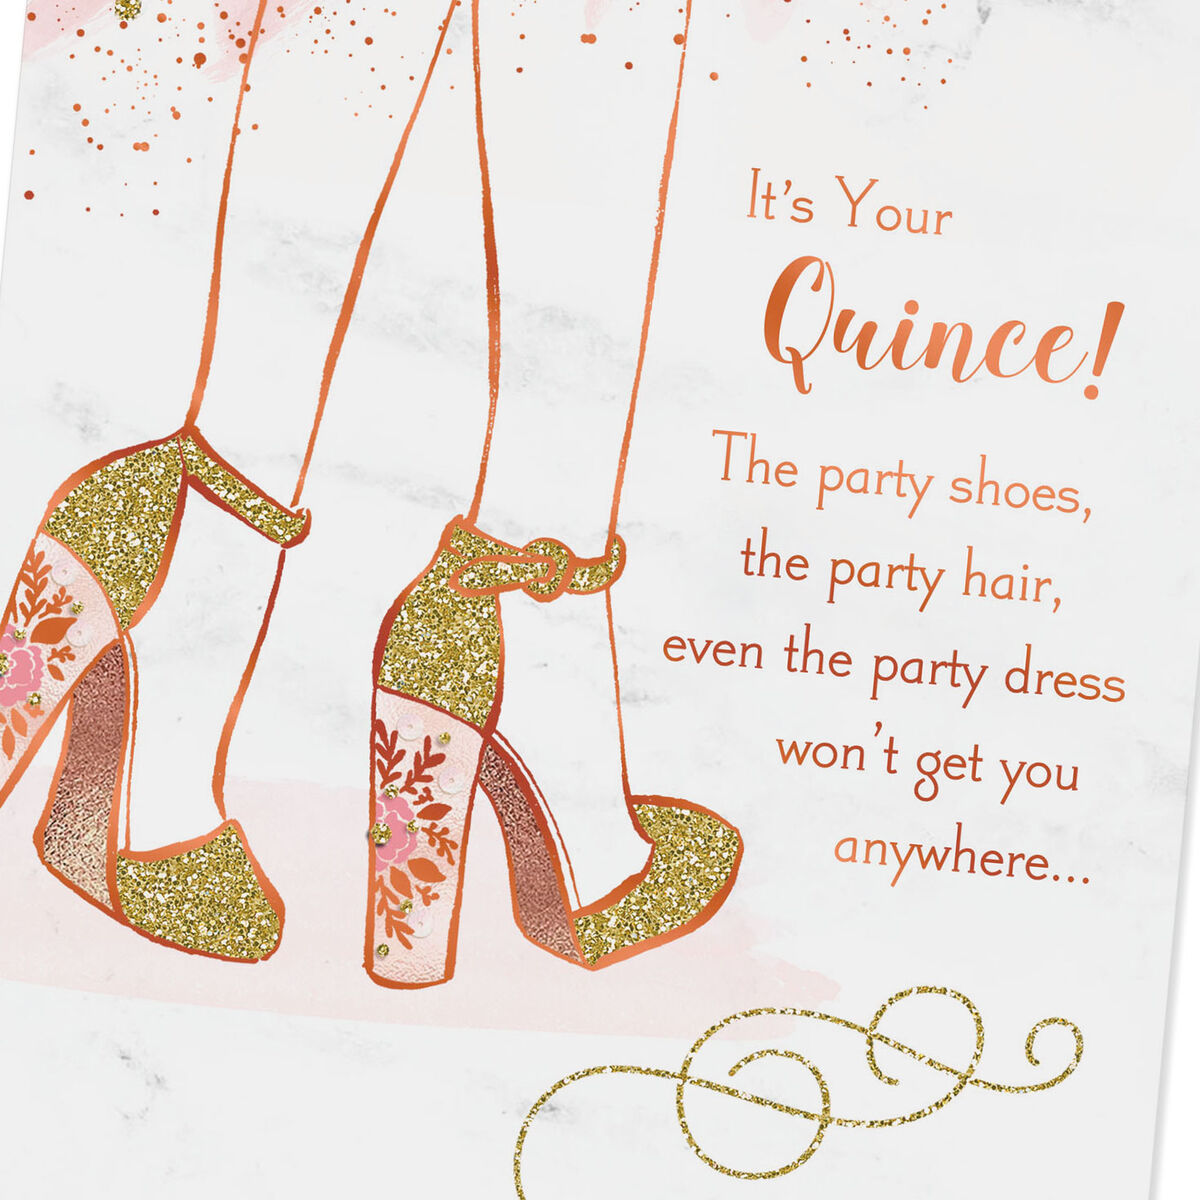 sparkly-party-shoes-birthday-card-for-quincea-era-greeting-cards